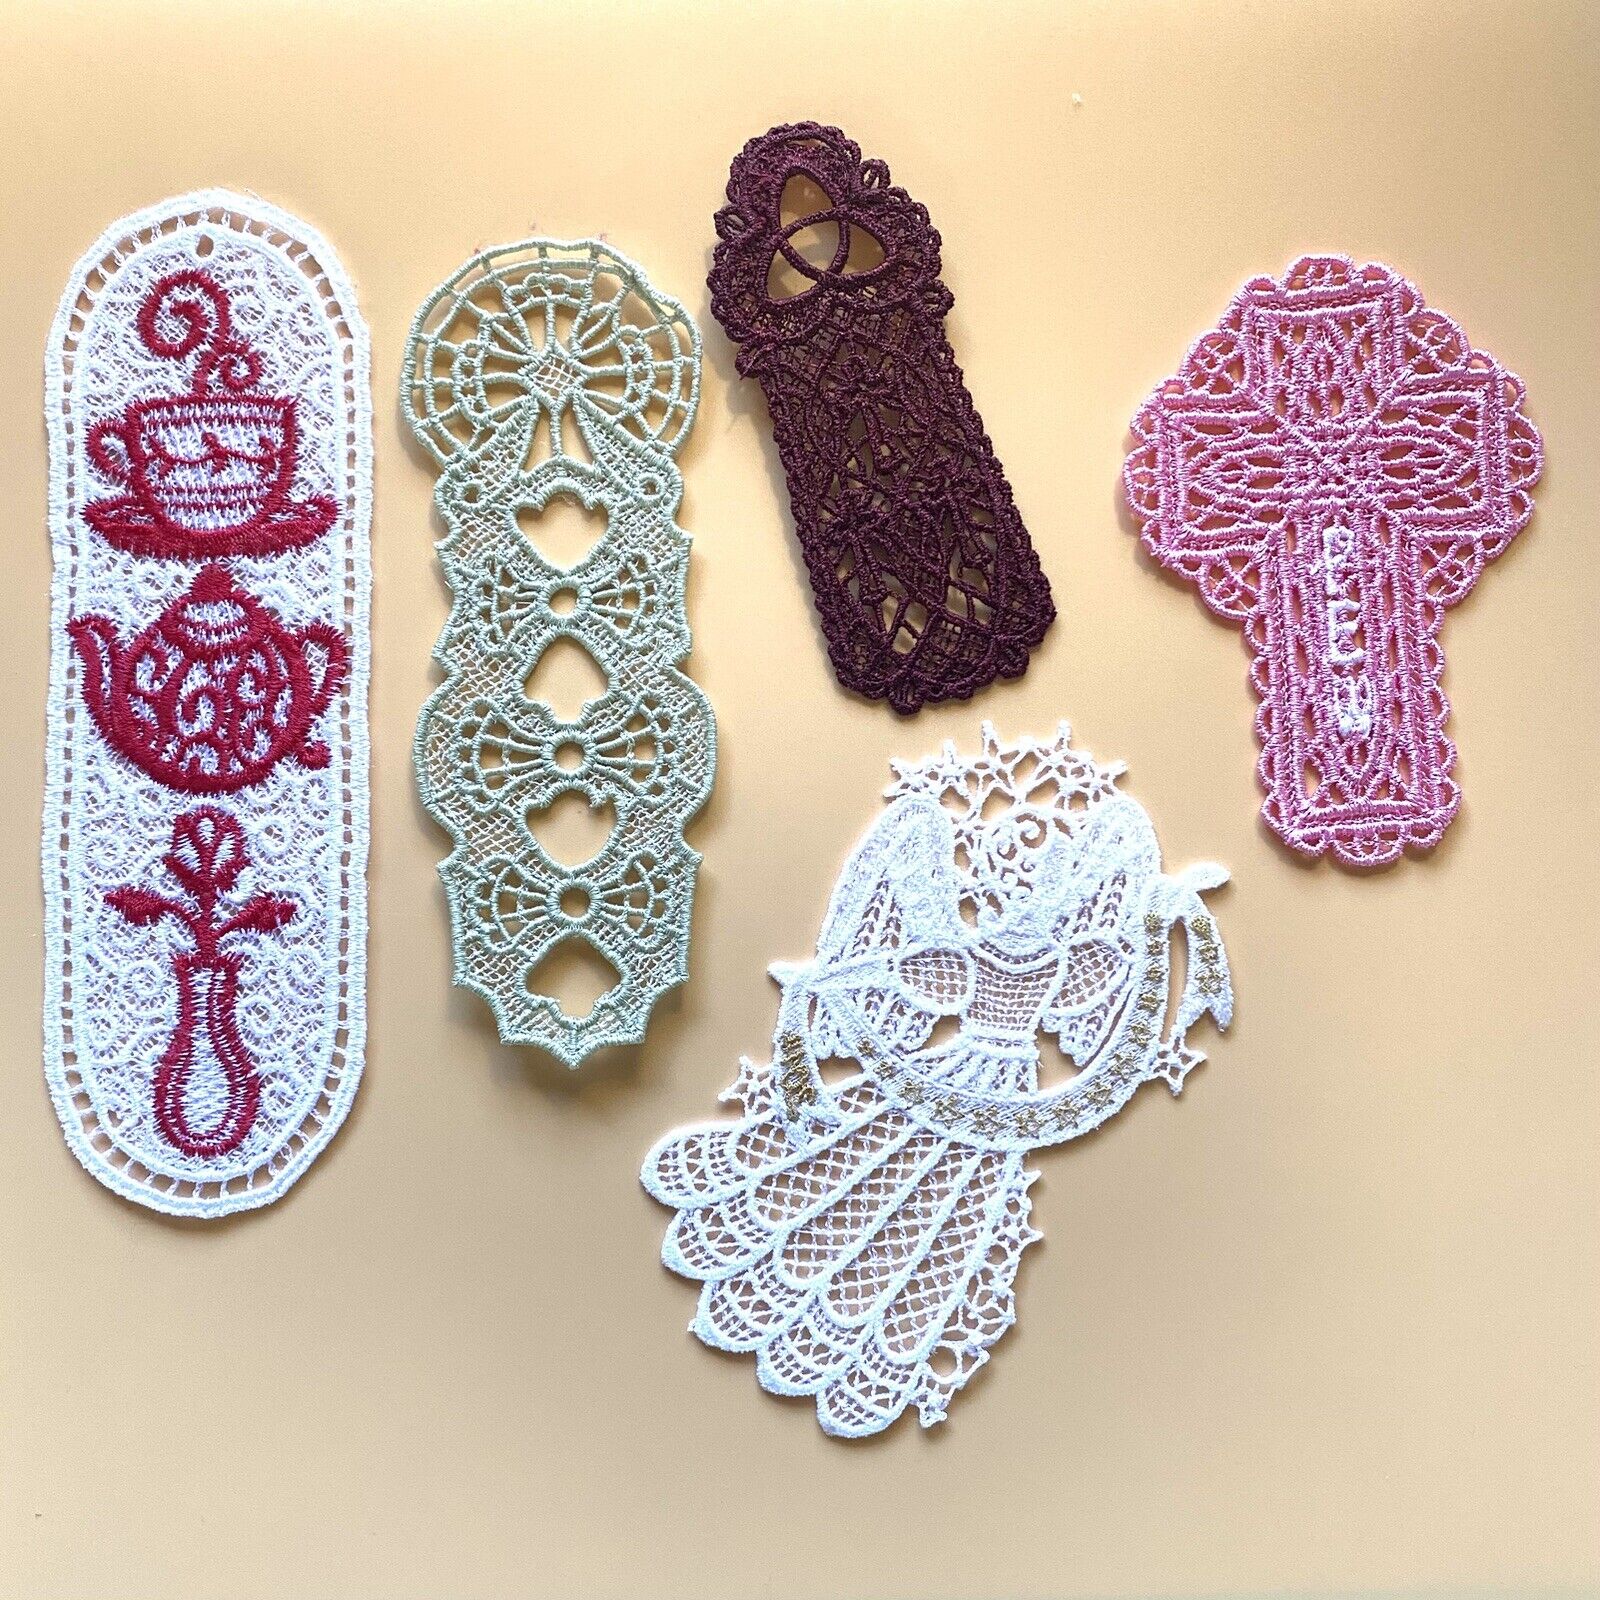 Christian Theme Lace Bookmarks Set Of 5 Different Colors And Designs Crosses